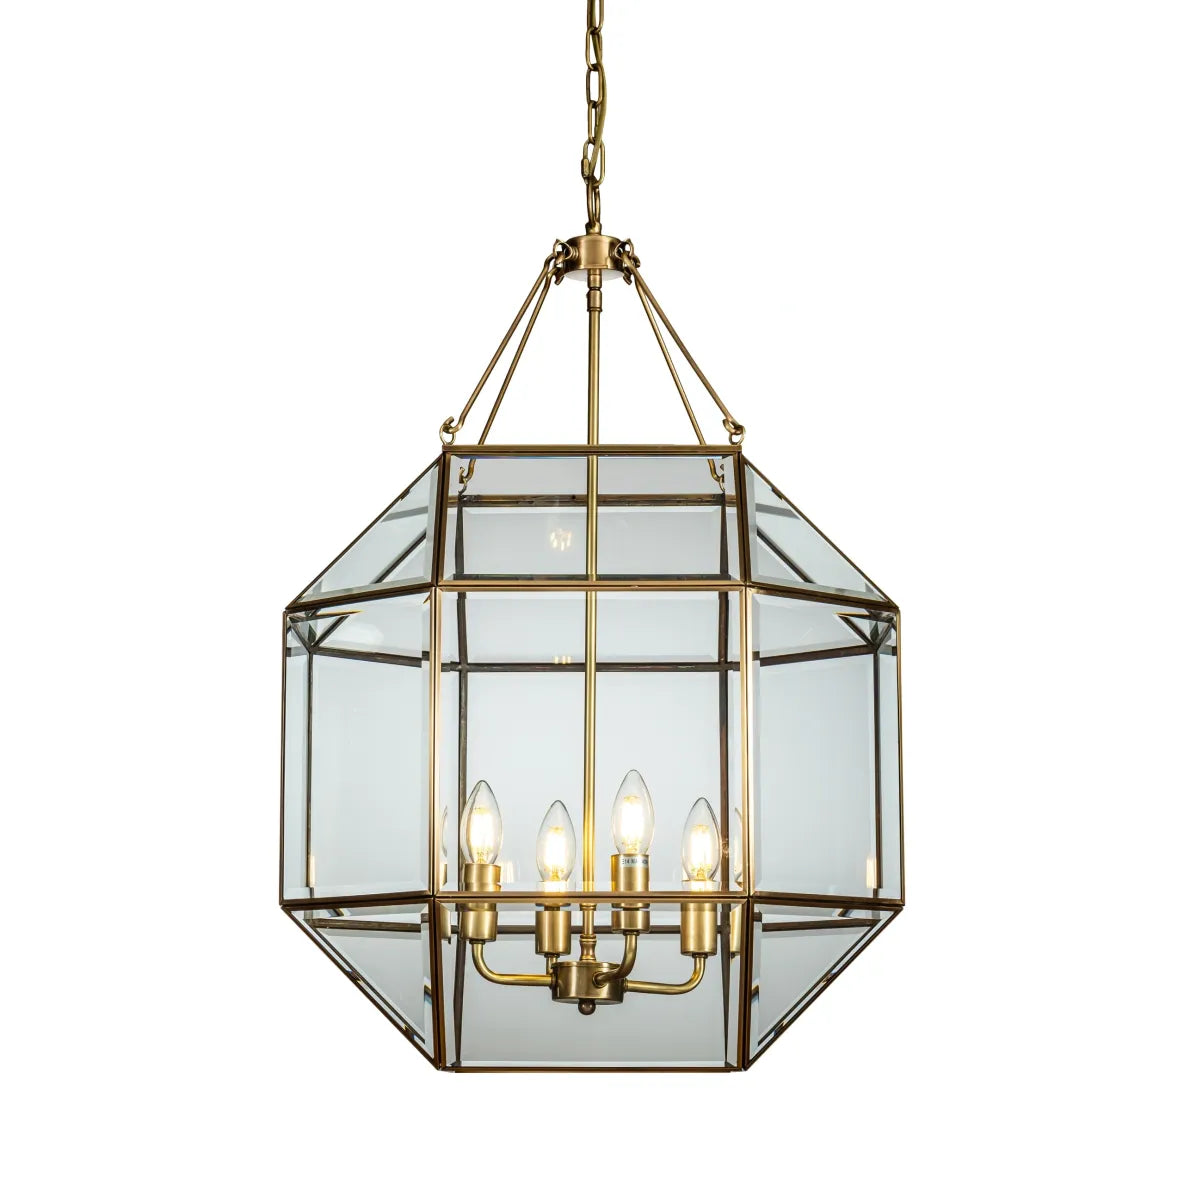 Venice Brass Square and Triangle Lantern Large